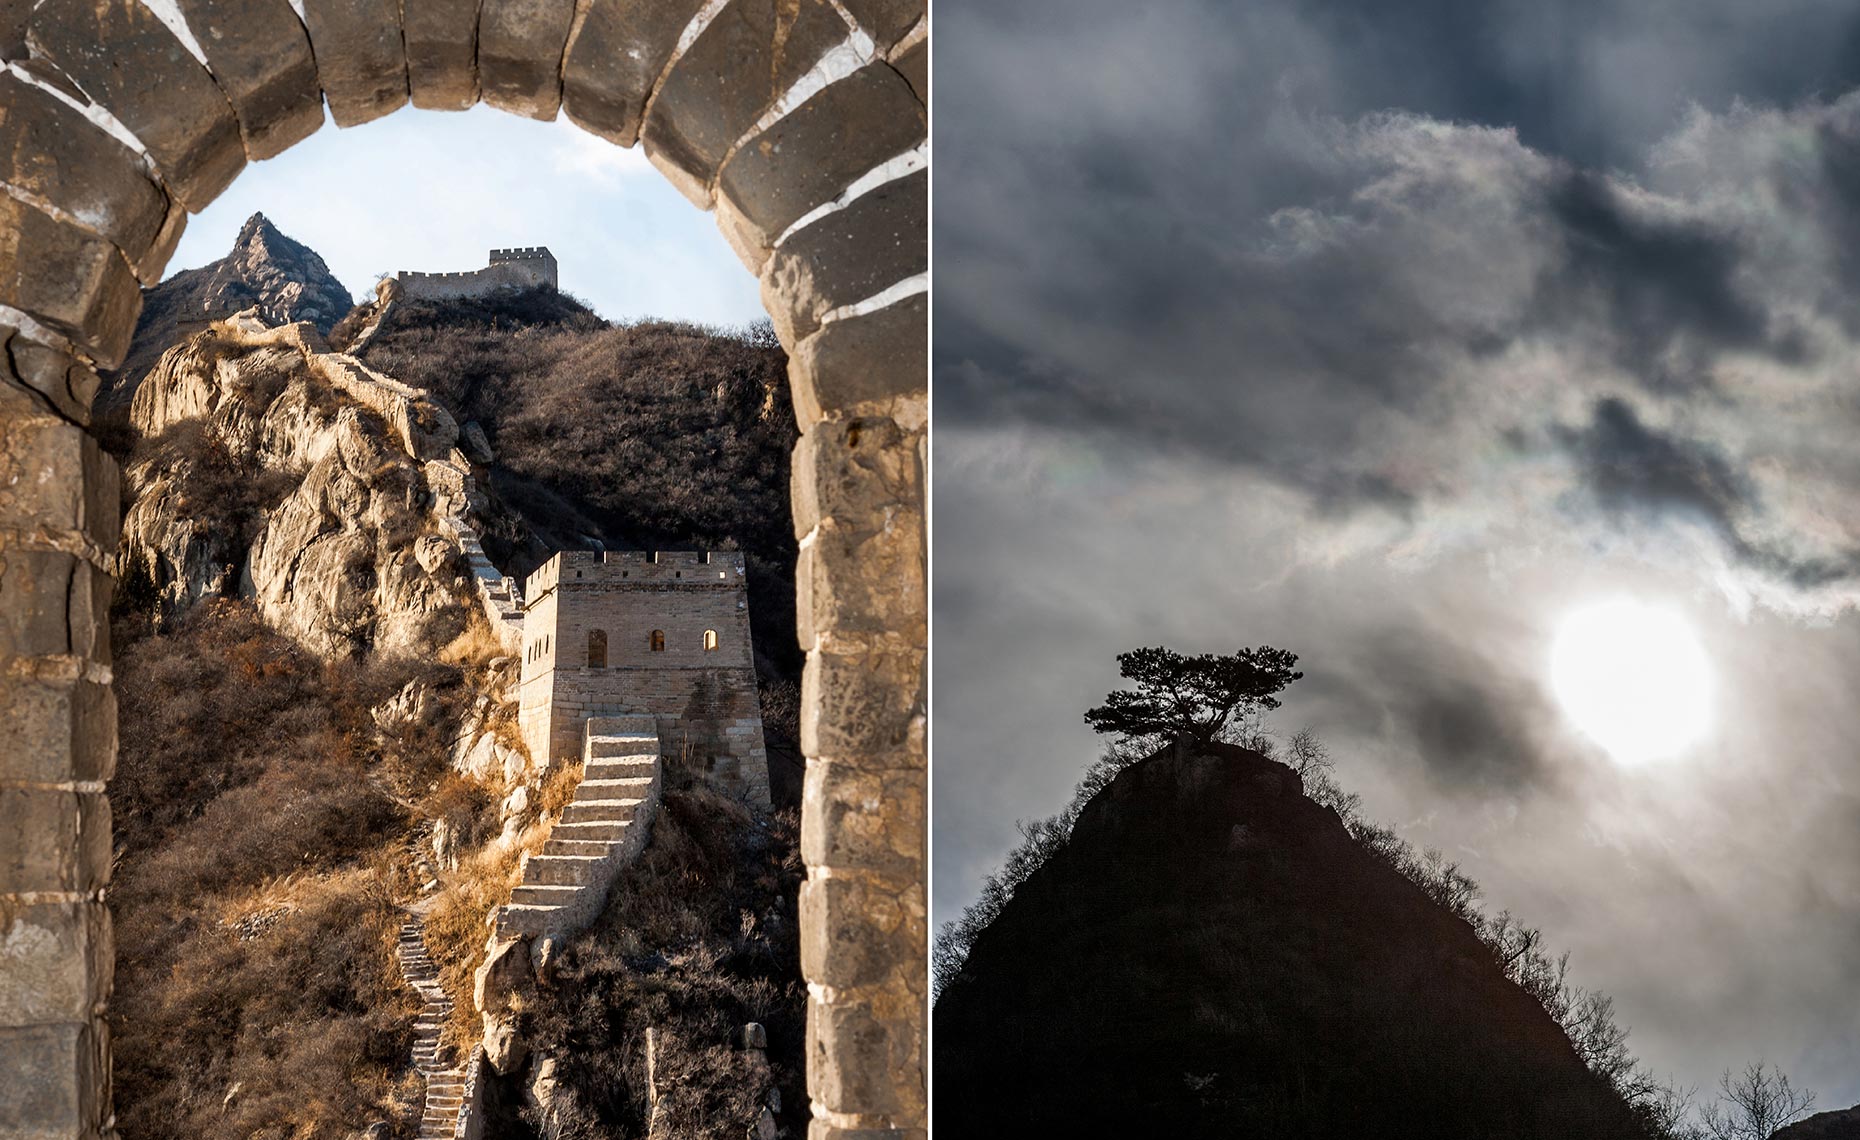 74_Beijing_China_The_Great_Wall_Environment_Landscape_Chris_Wellhausen_Photography.JPG